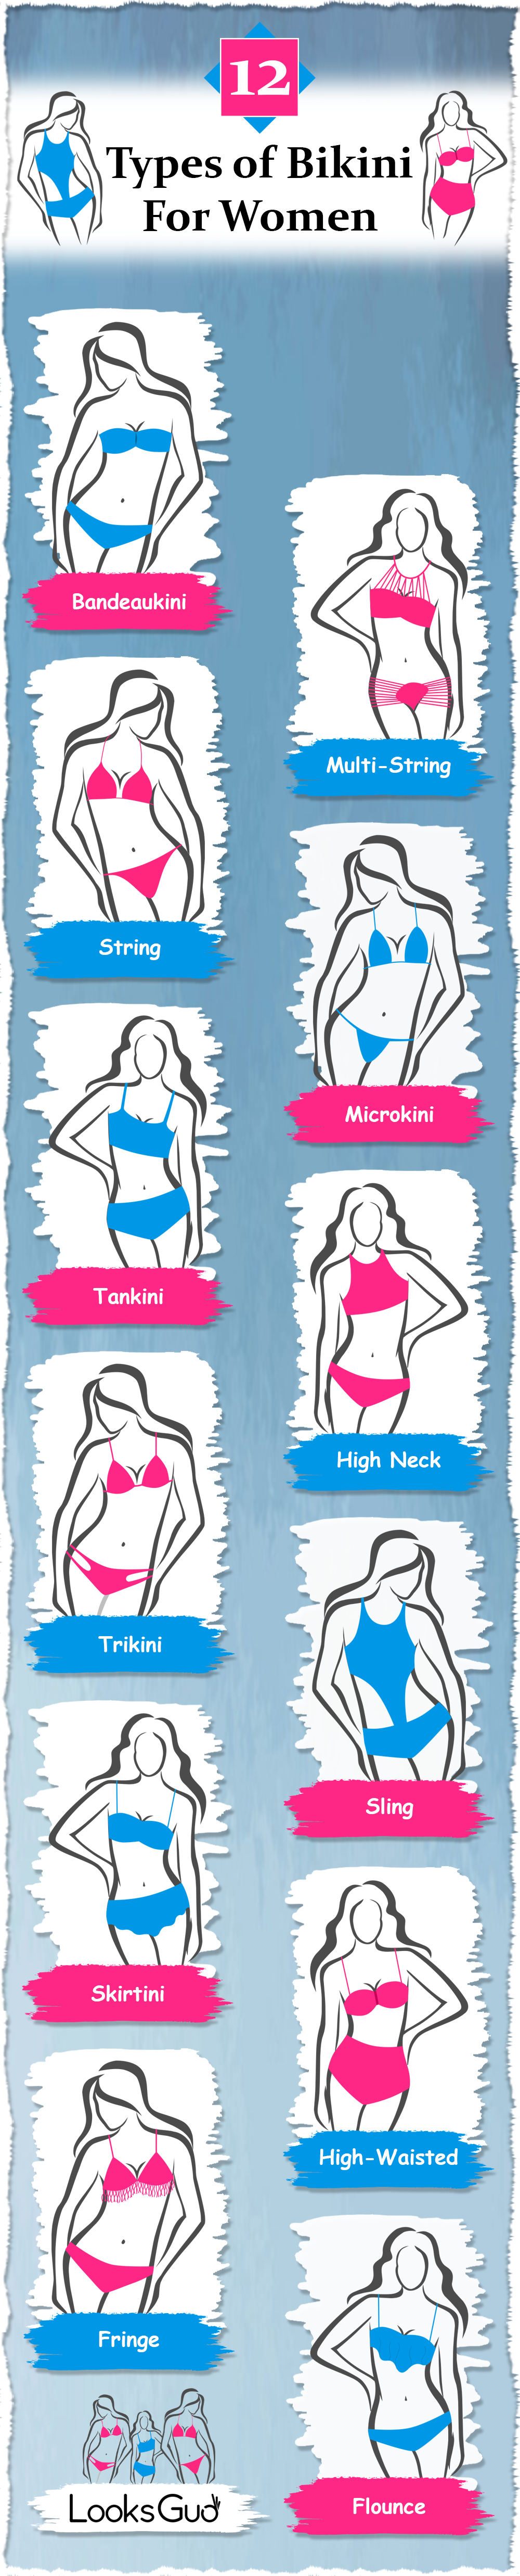 Different types of bikini with top and bottom cuts